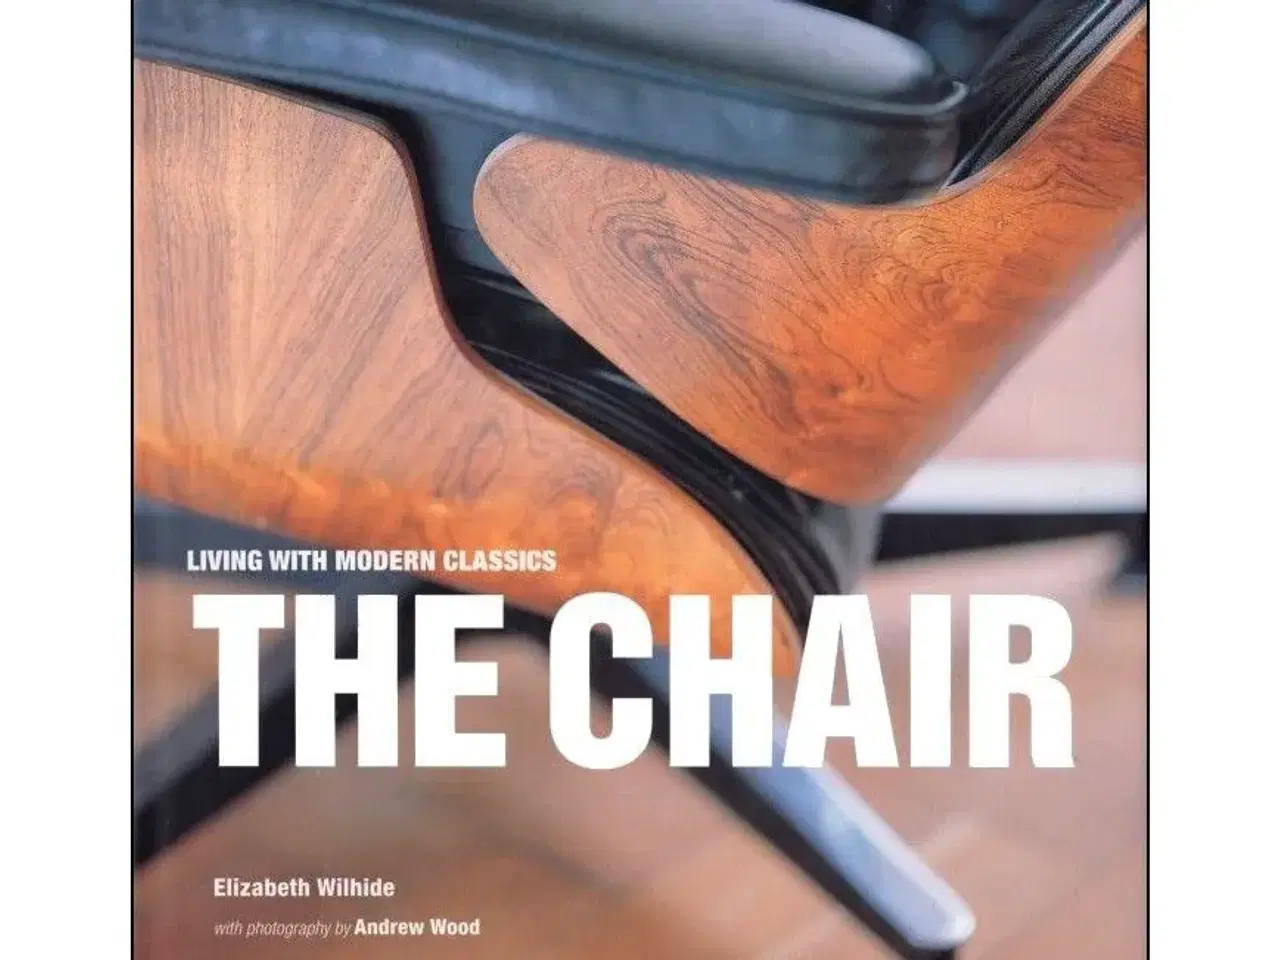 Billede 1 - Living with Modern Classics: The Chair